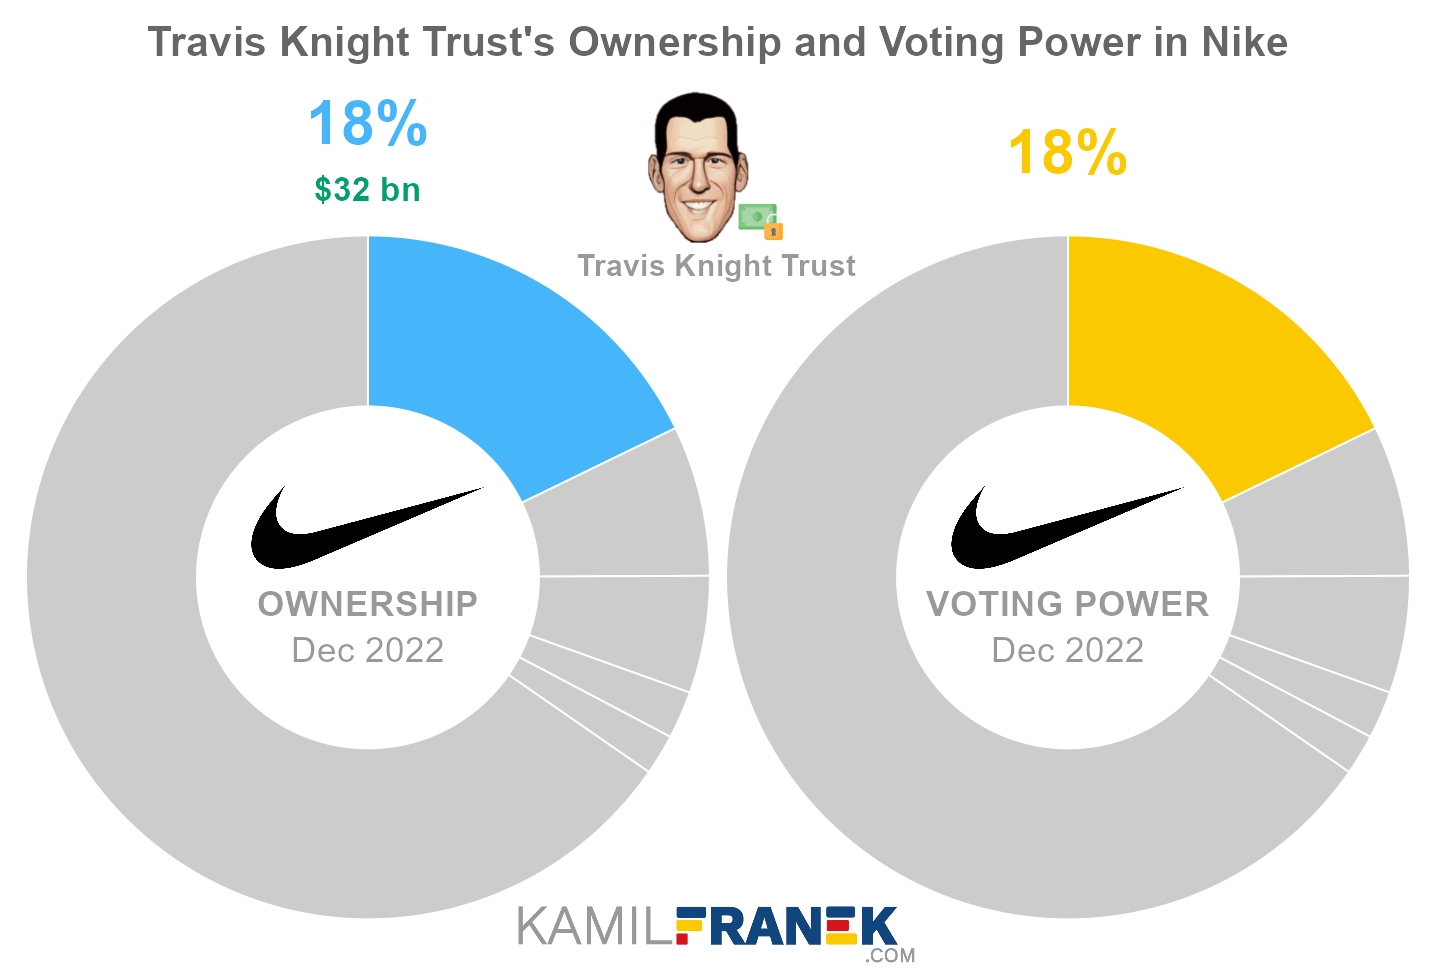 Travis Knight Trust's share ownership and voting power in Nike (chart)